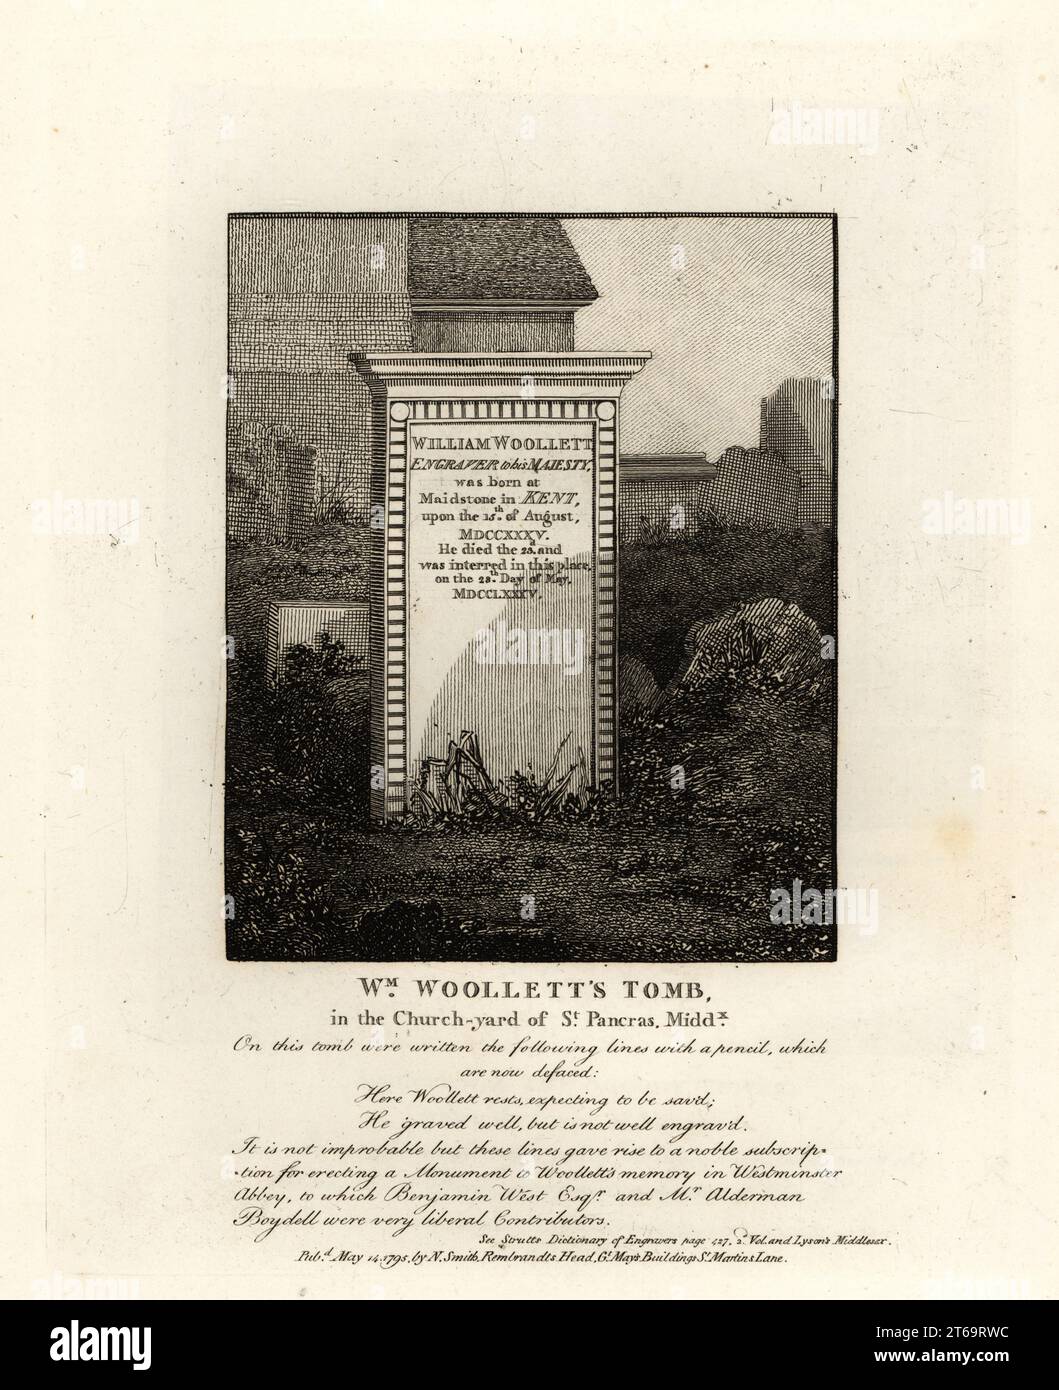 Tomb of royal engraver William Woollett, died 1735, in the churchyard of St. Pancras, Middlesex. Copperplate engraving by John Thomas Smith after original drawings by members of the Society of Antiquaries from his J.T. Smiths Antiquities of London and its Environs, J. Sewell, R. Folder, J. Simco, London, 1795. Stock Photo